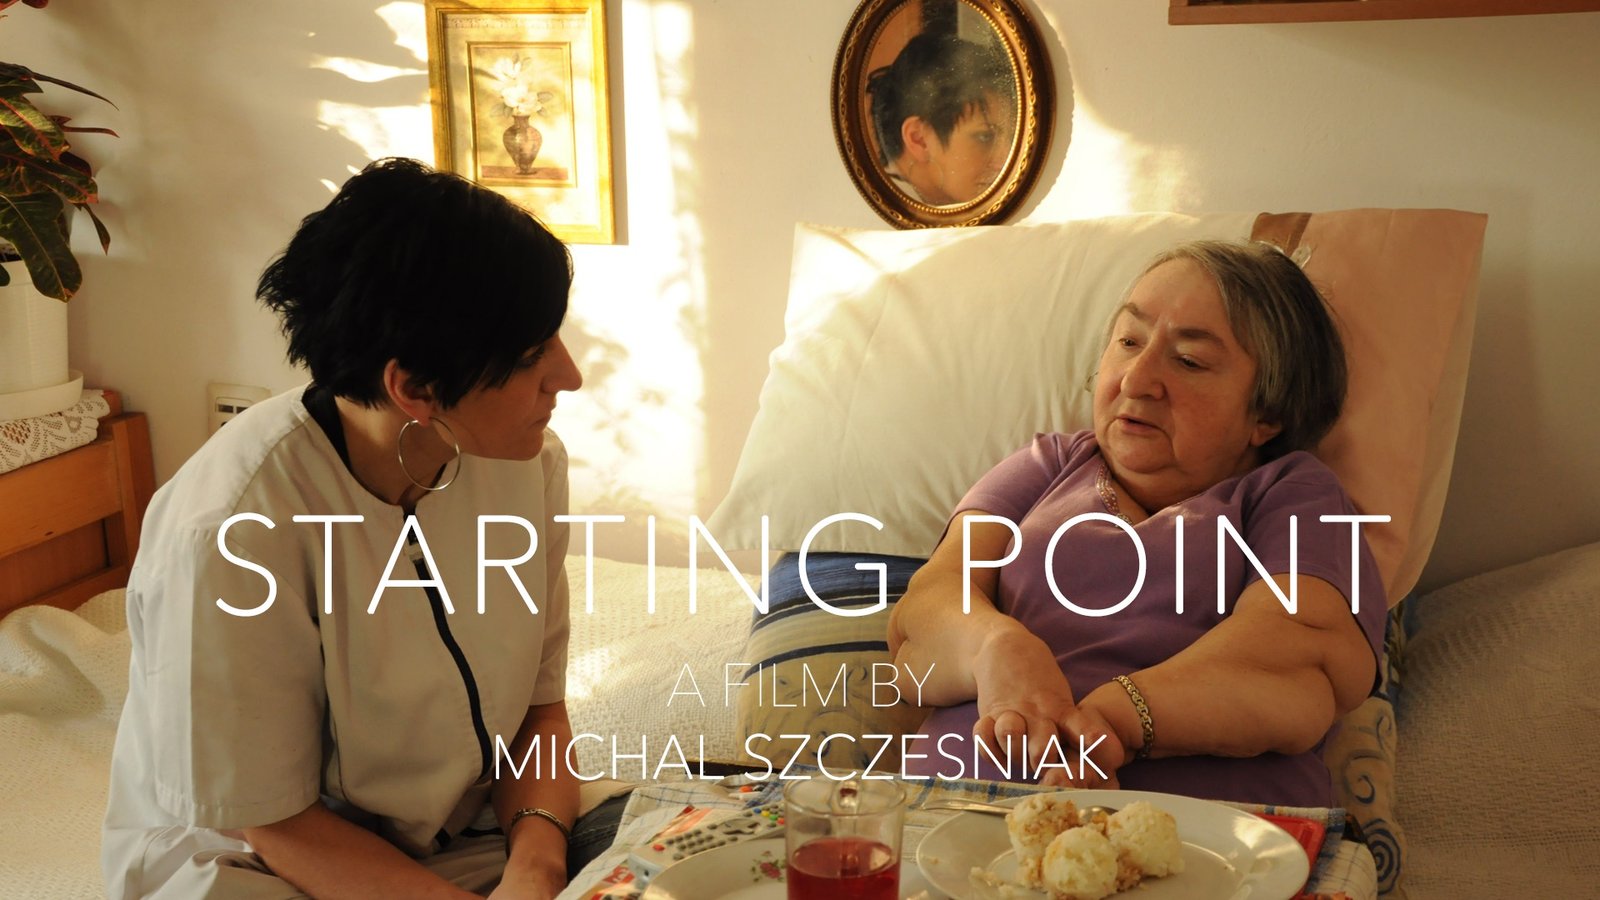 Starting Point - A Woman's Journey Through the Criminal Justice and Healthcare Systems